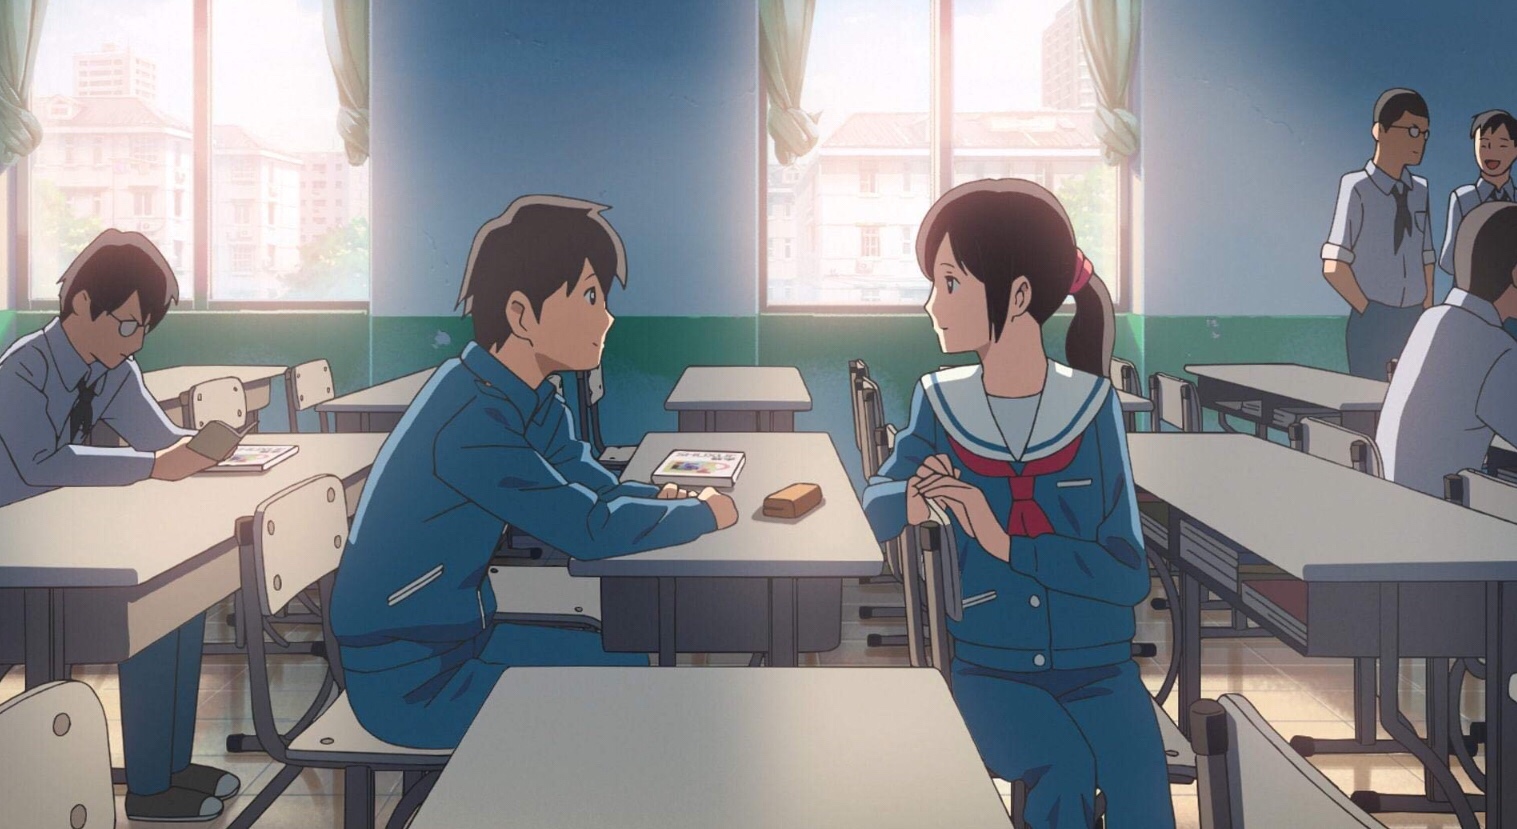 “Flavors of Youth” Explores the Essentials of Identity